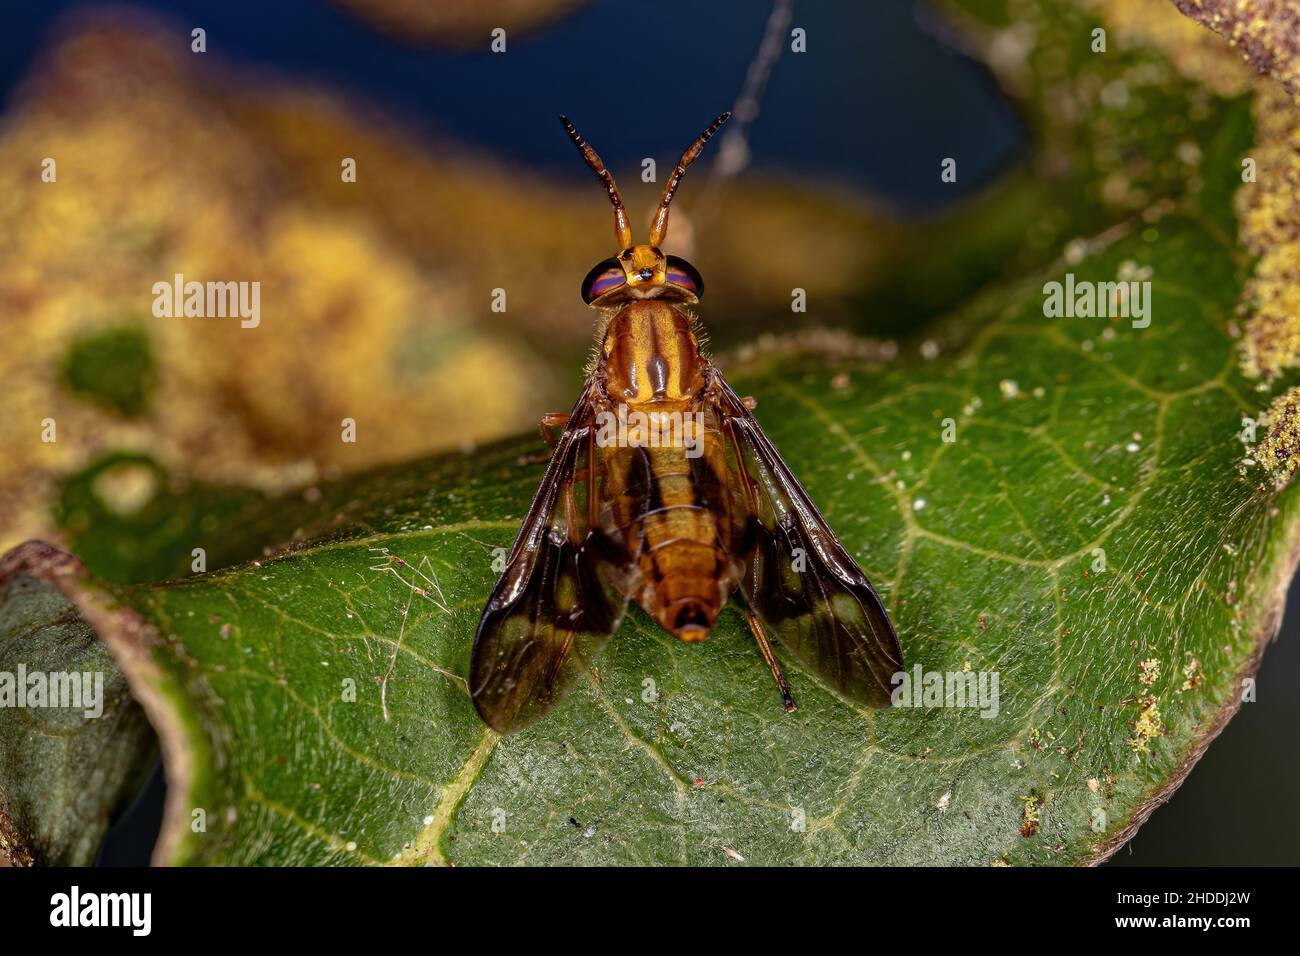 Adult Horse Fly of the Genus Chrysops Stock Photo